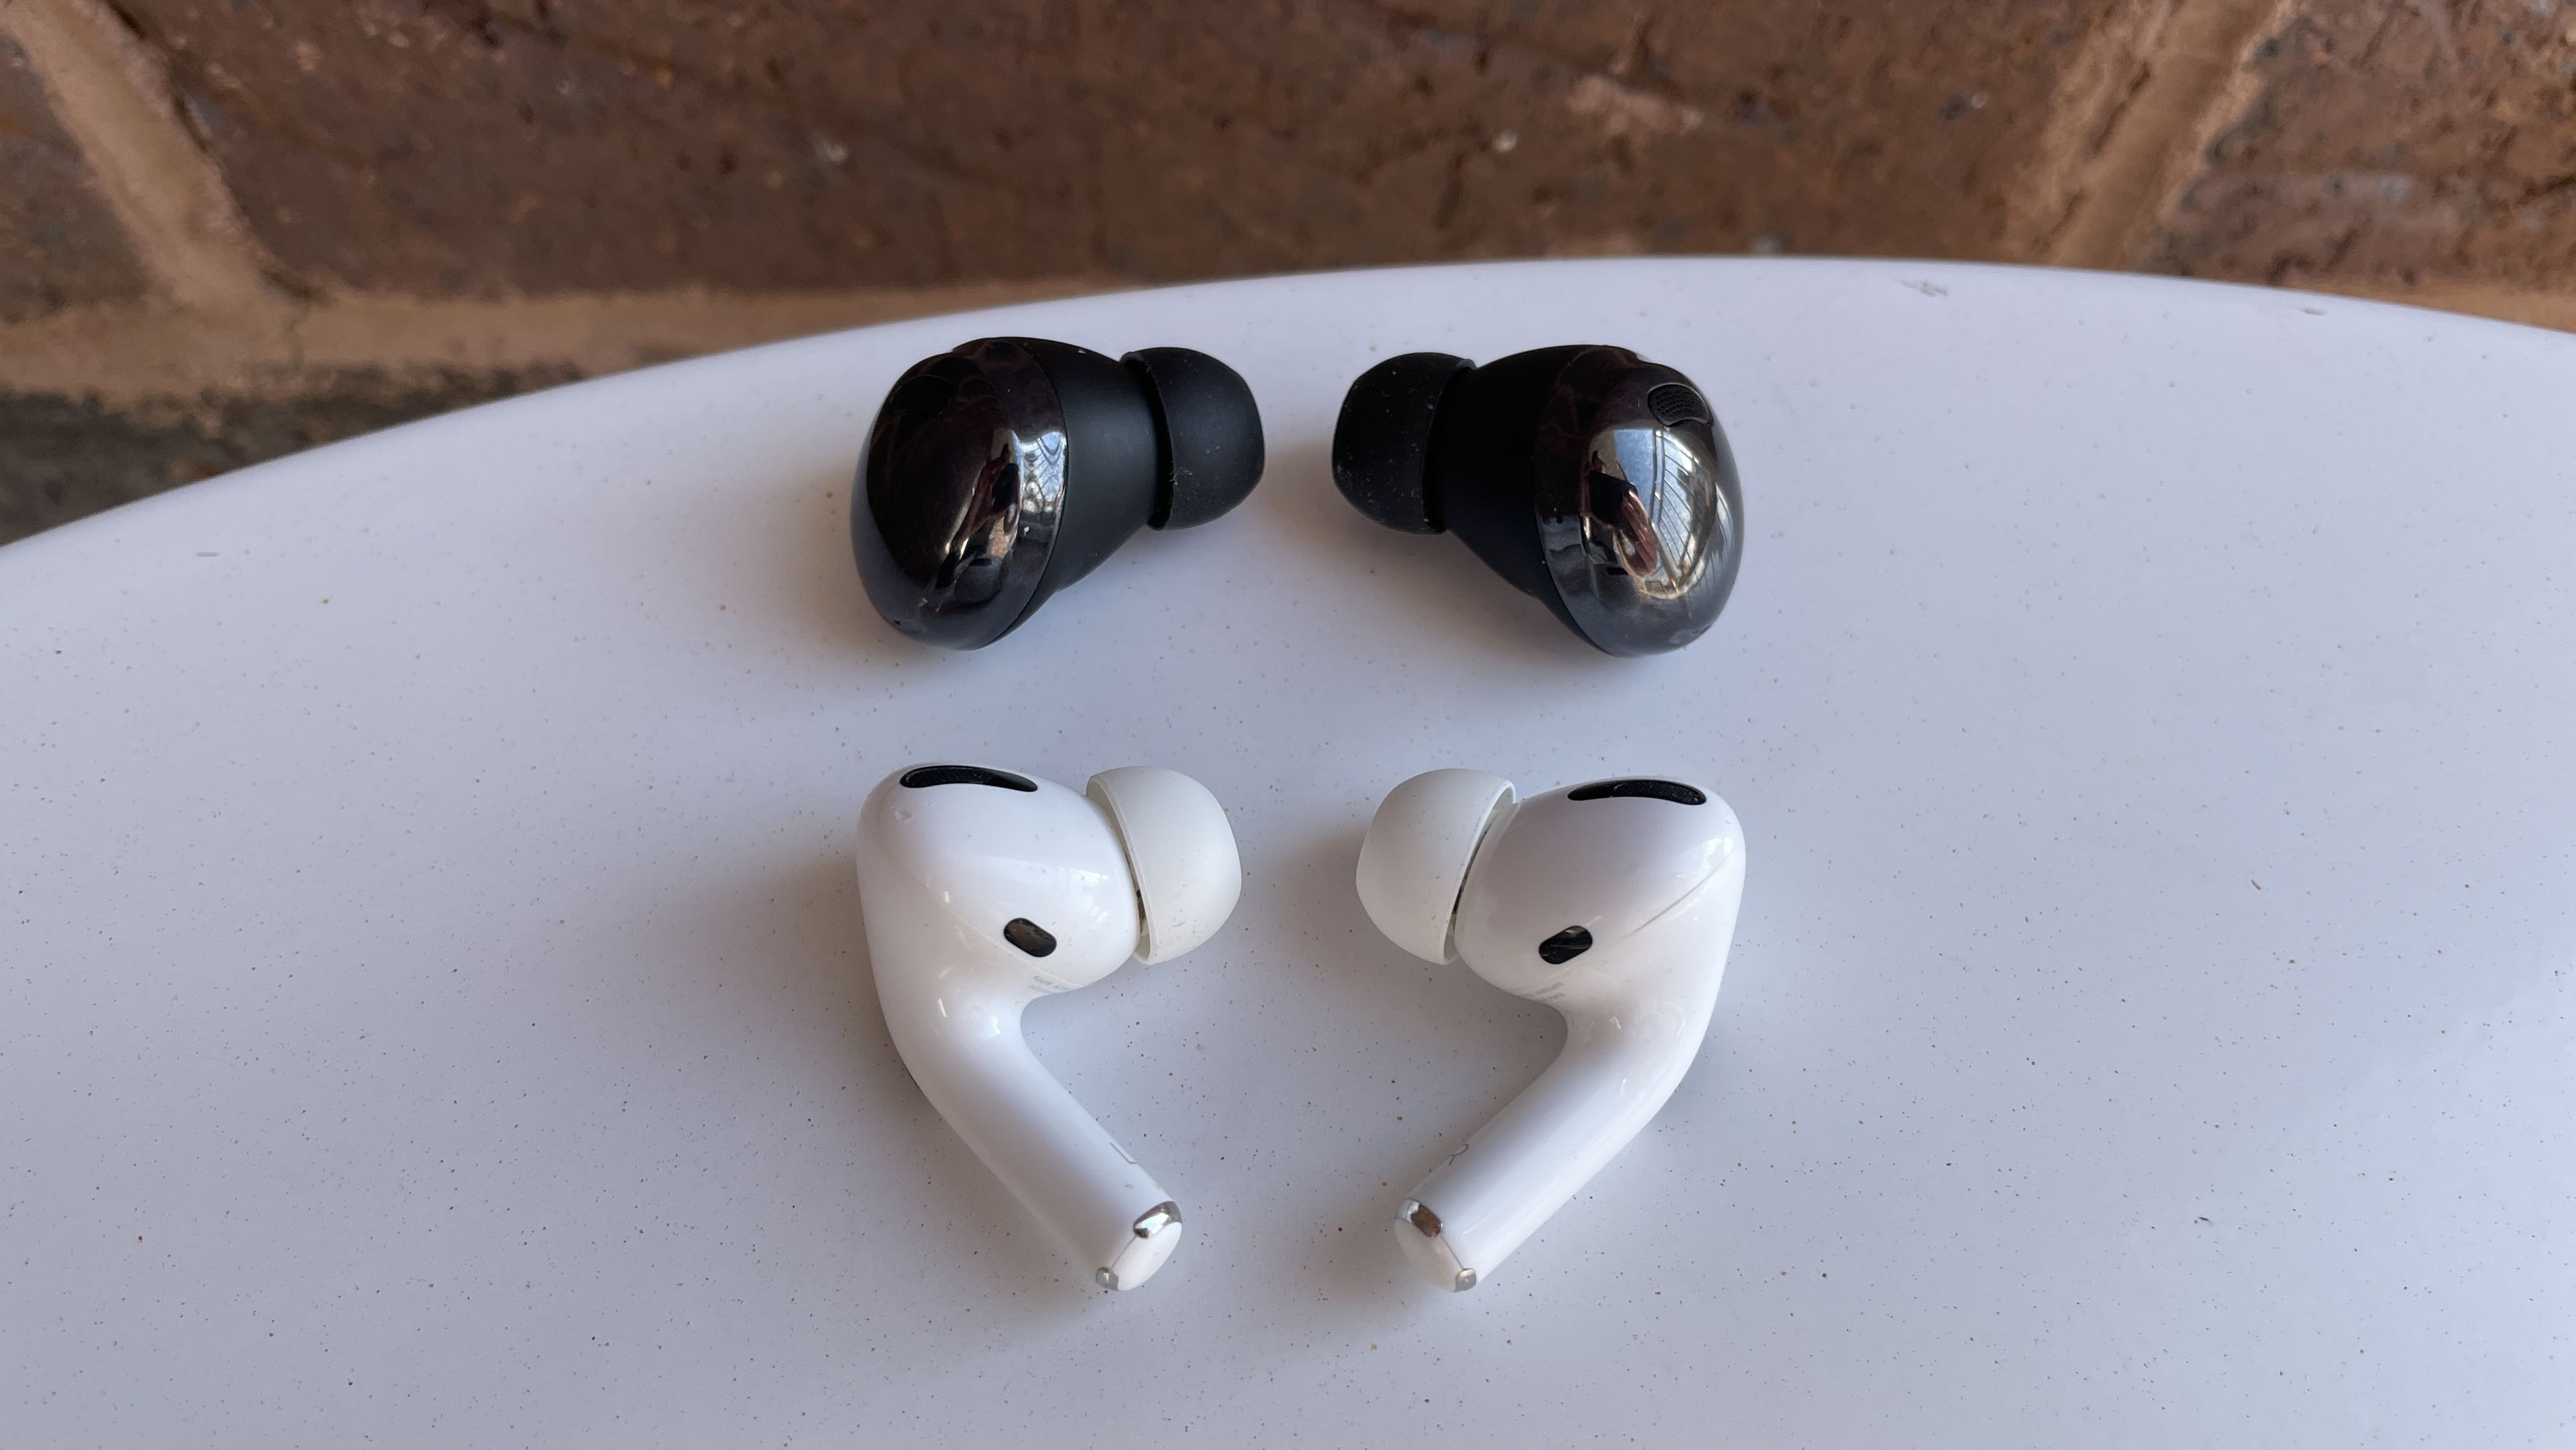 Difference between Wired and Wireless AirPods Charging Case : r/airpods